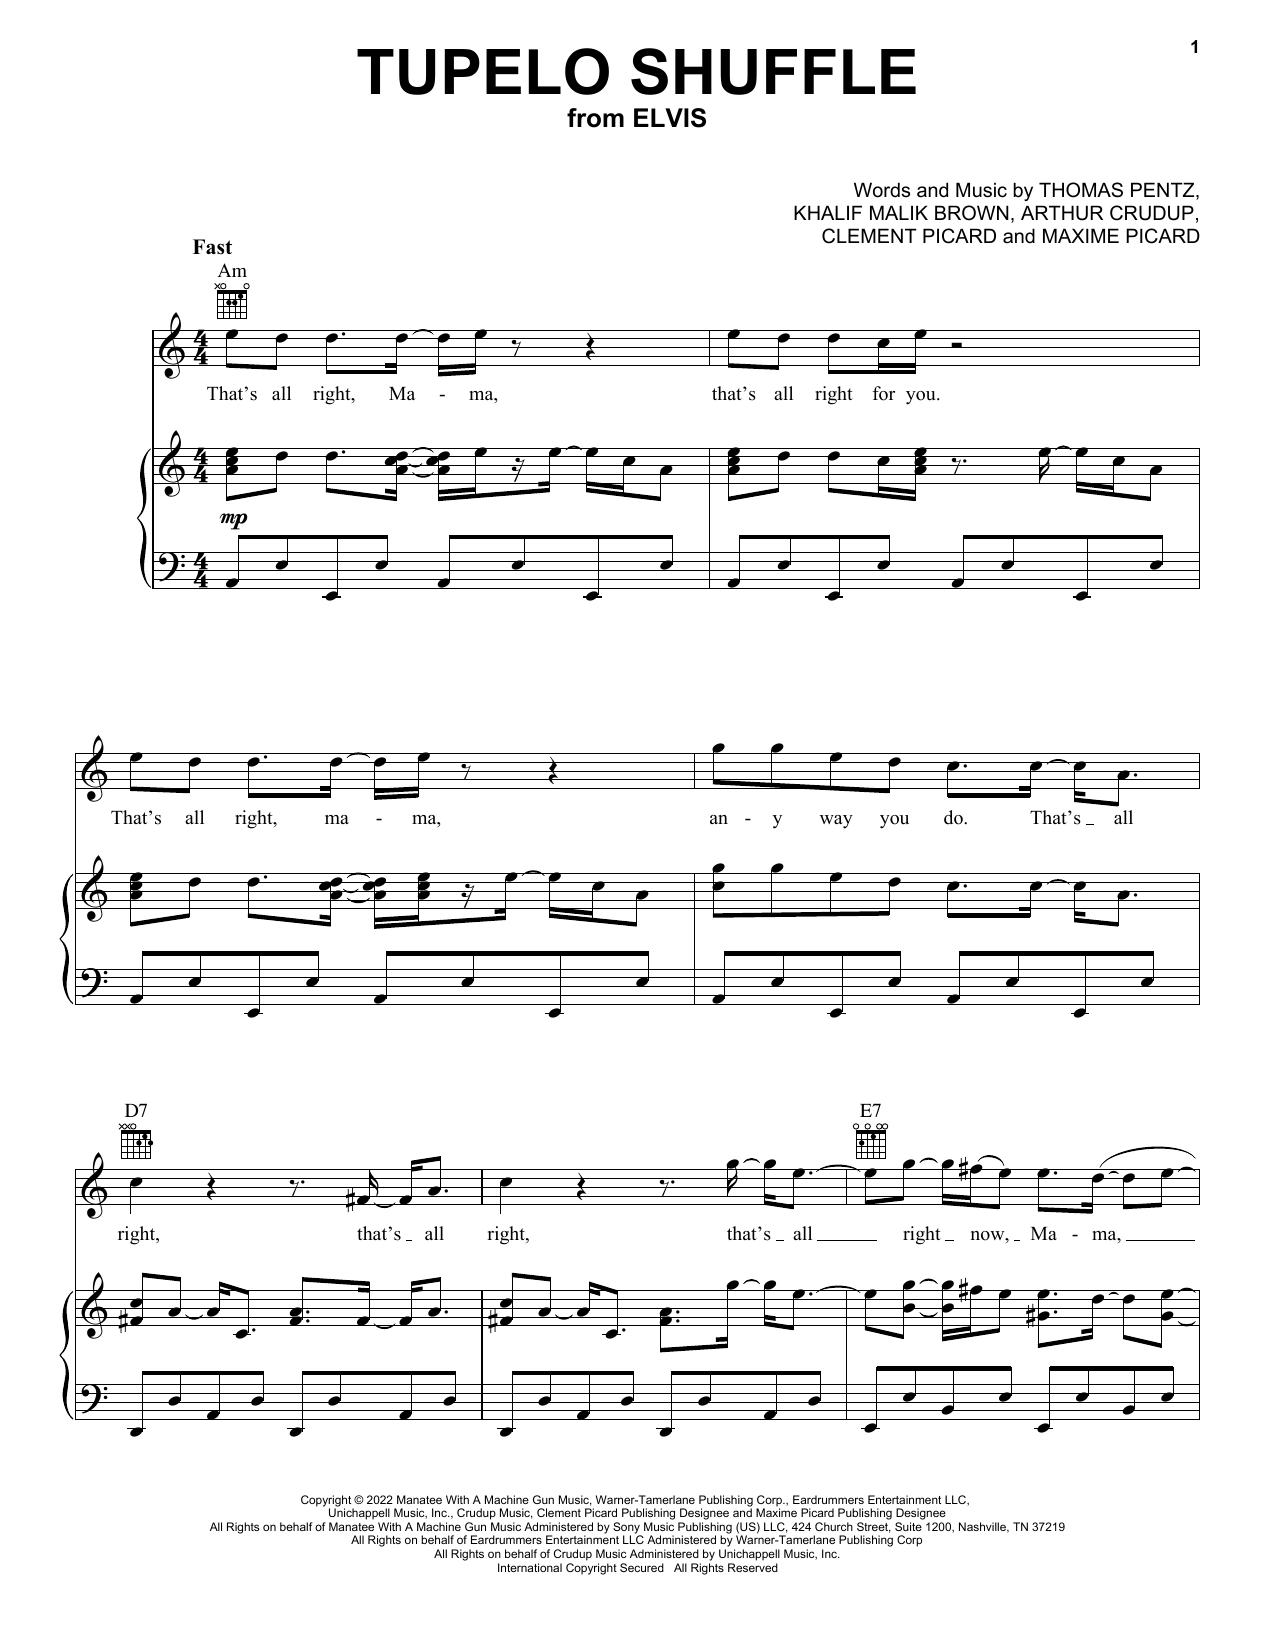 Swae Lee & Diplo / from ELVIS Tupelo Shuffle sheet music notes and chords. Download Printable PDF.